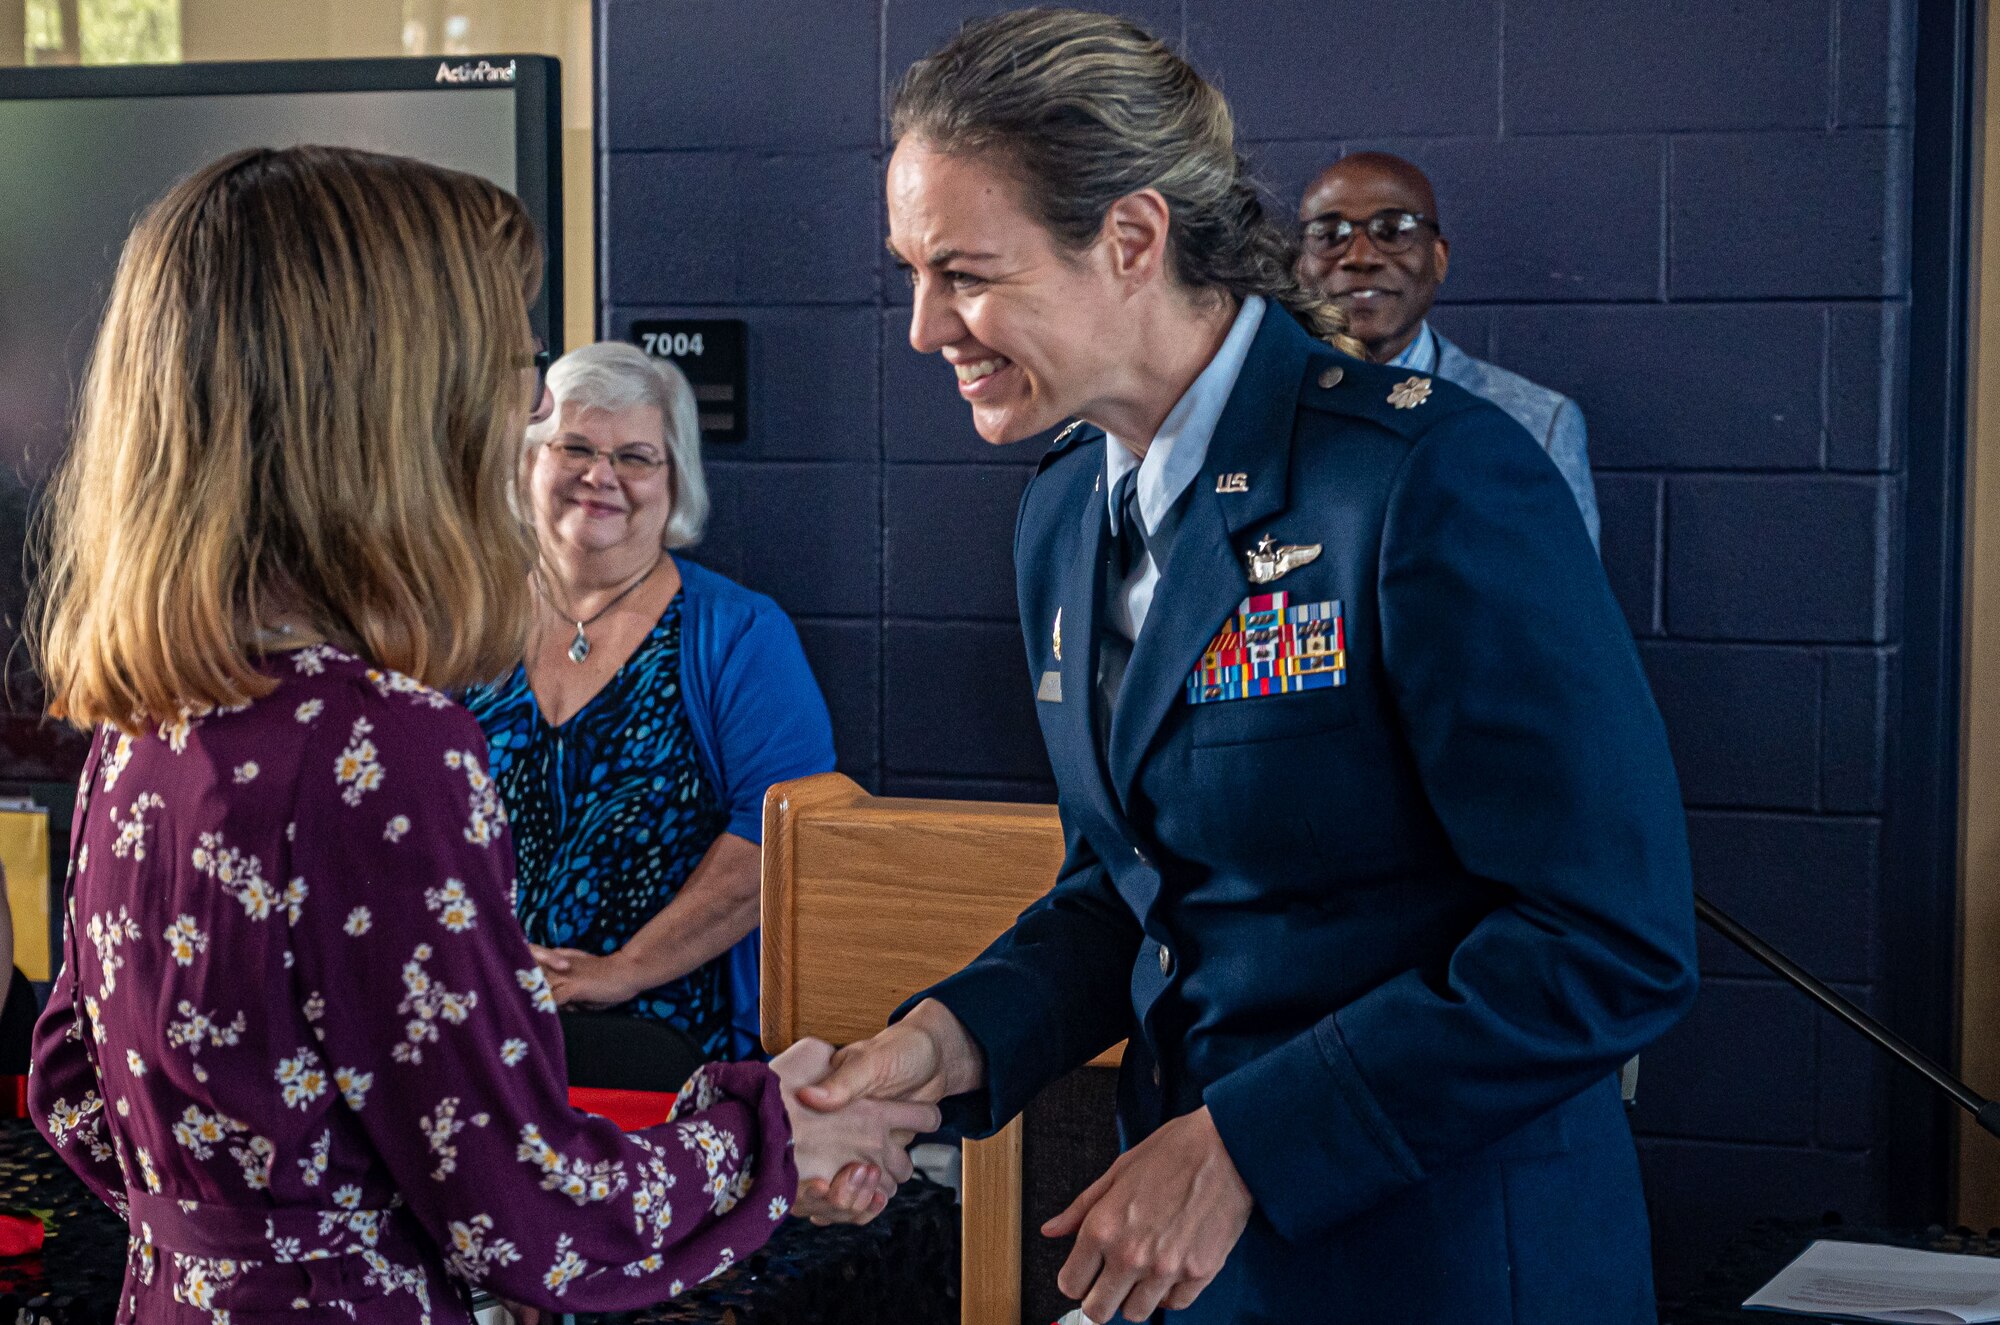 A photo of a U.S. Air Force member shaking hands with someone.